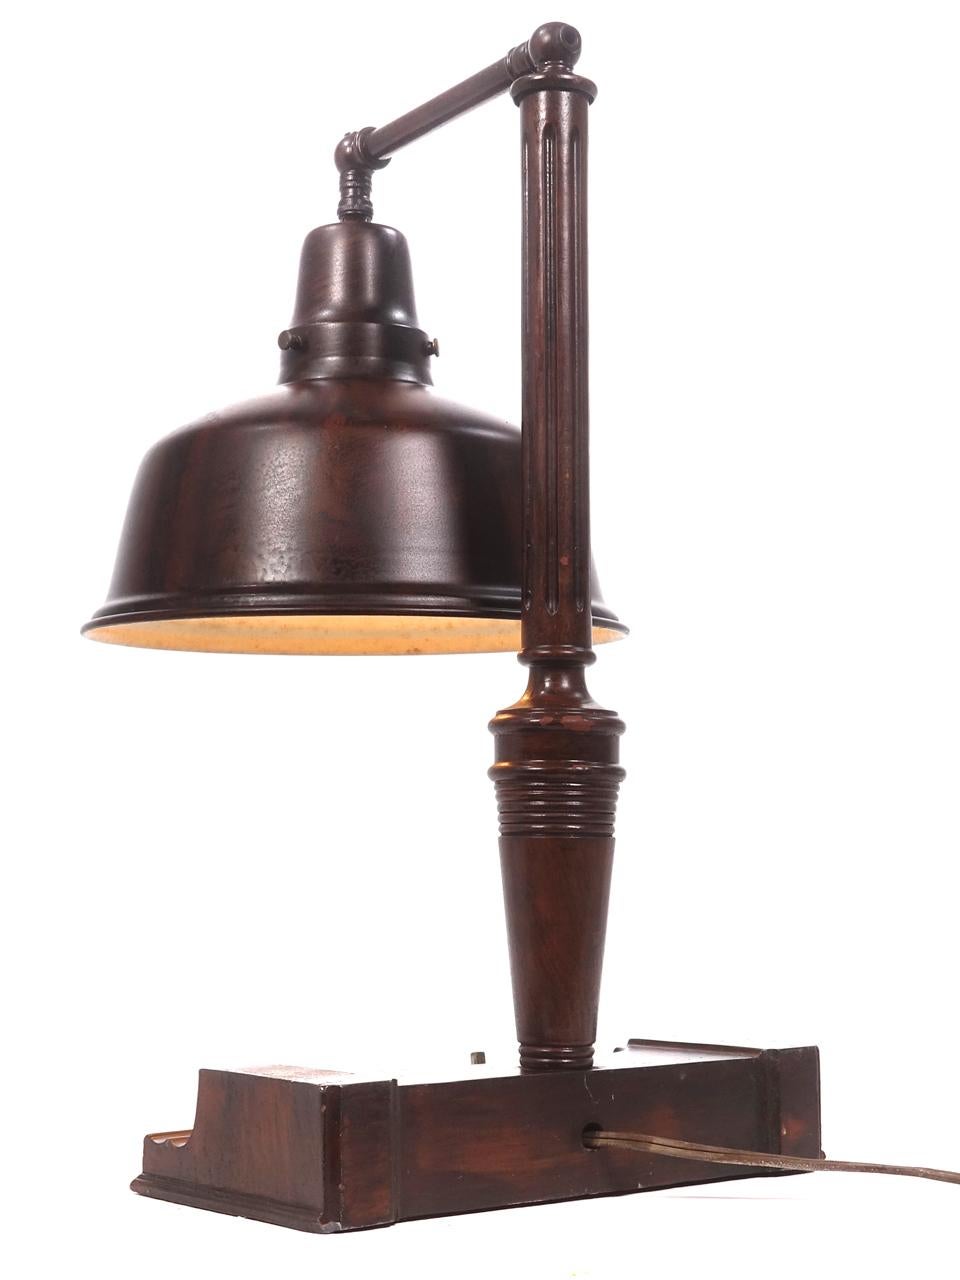 These are heavy industrial quality brass table lamps. These lamps date to the 1930s. They have a wood grained metal finish and an oversized shade. Perfect for showing off watches and diamonds. The finish and paint are untouched showing the aged